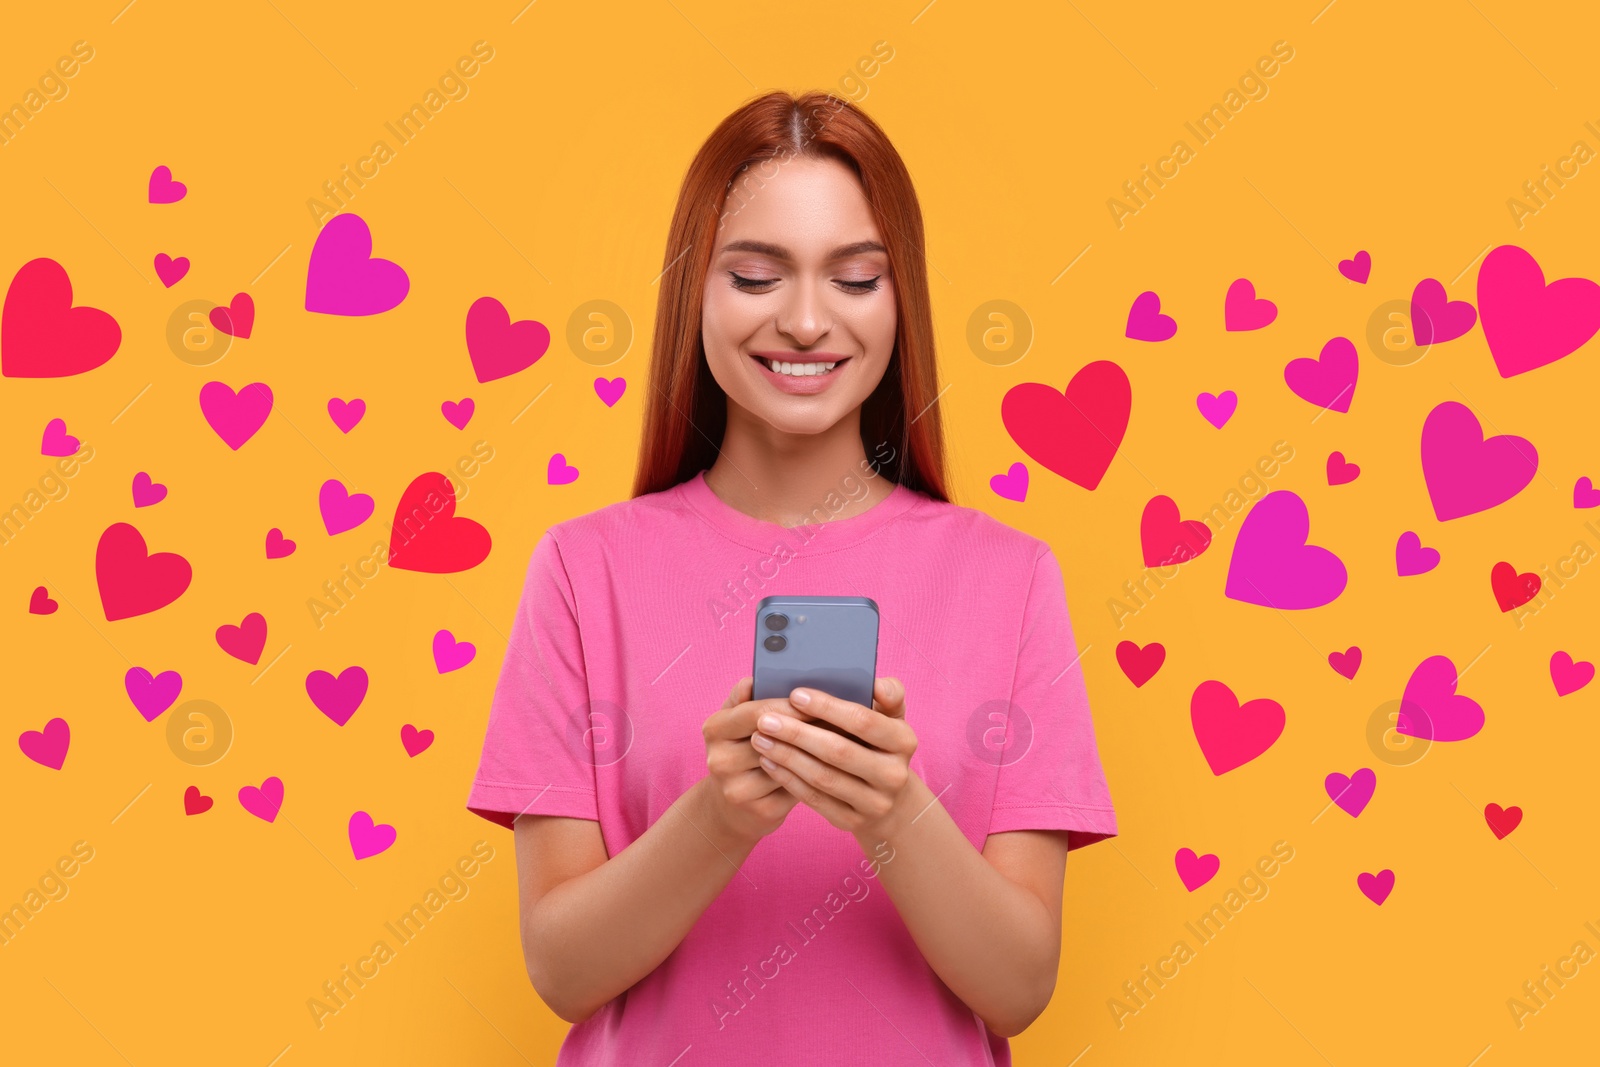 Image of Long distance love. Woman chatting with sweetheart via smartphone on golden background. Hearts flying out of device and swirling around her